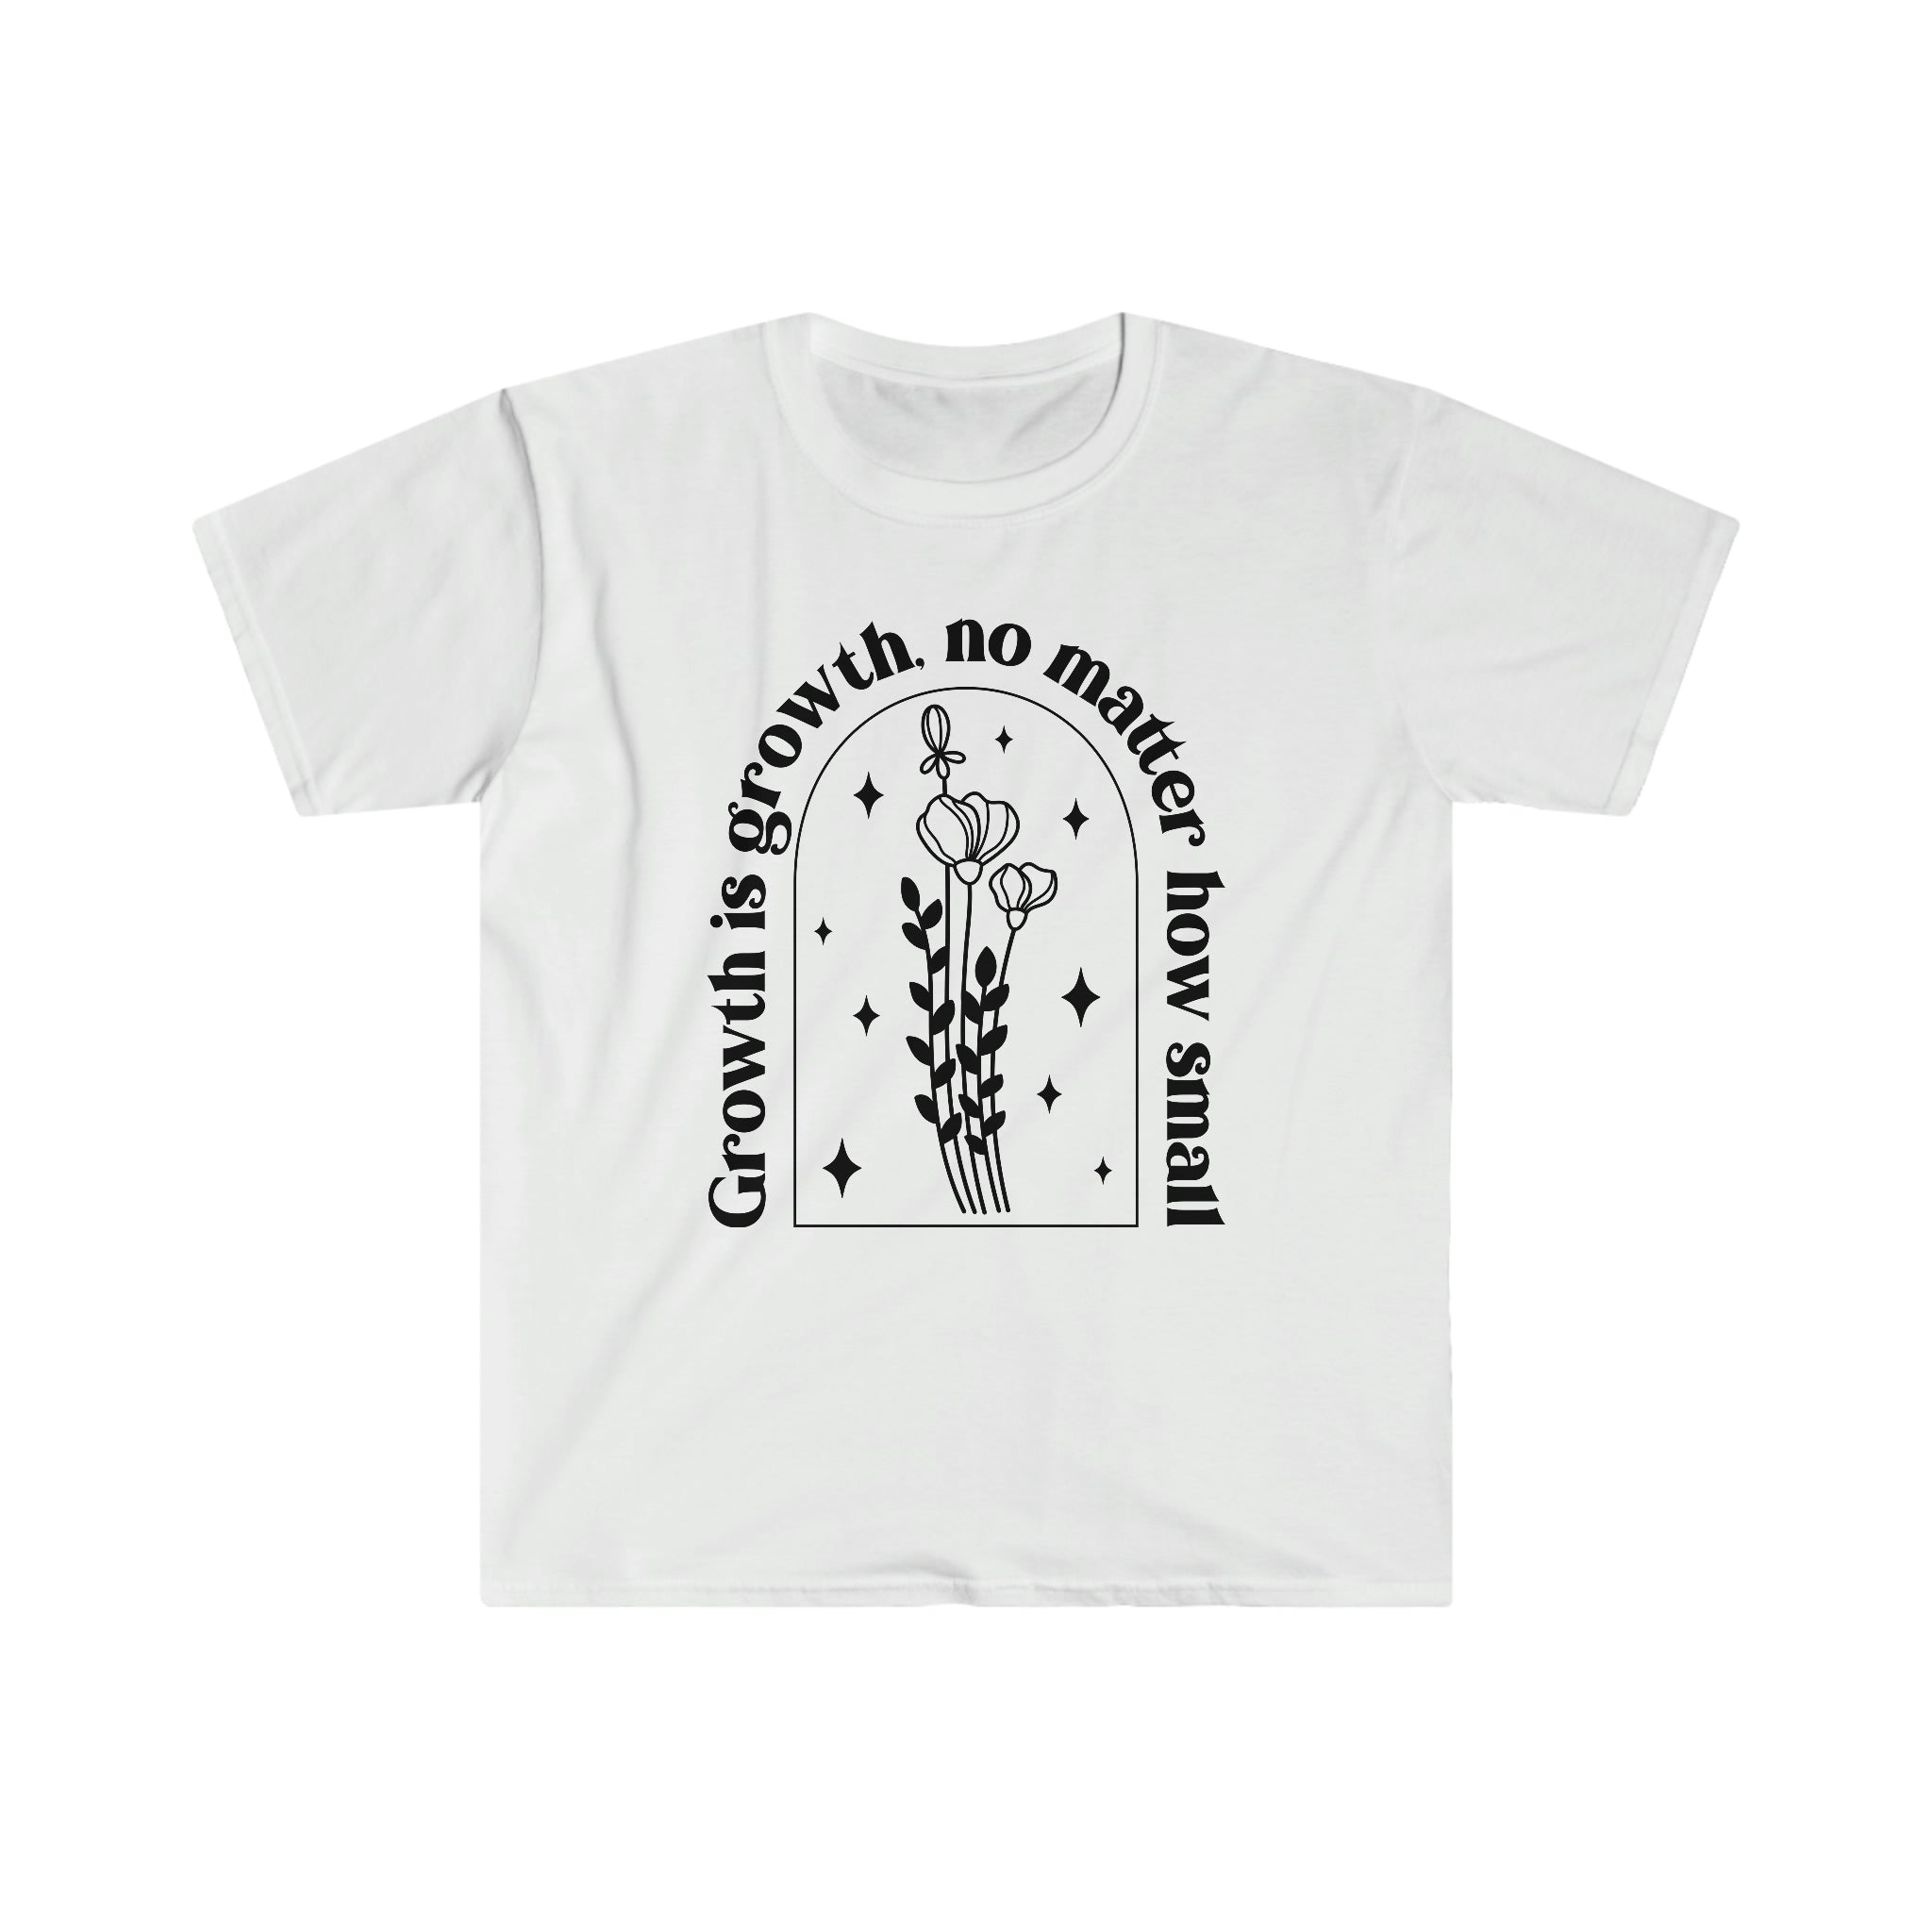 A comfortable white Growth Is Growth No Matter How Small T-Shirt featuring an image of a plant and the word "grow".